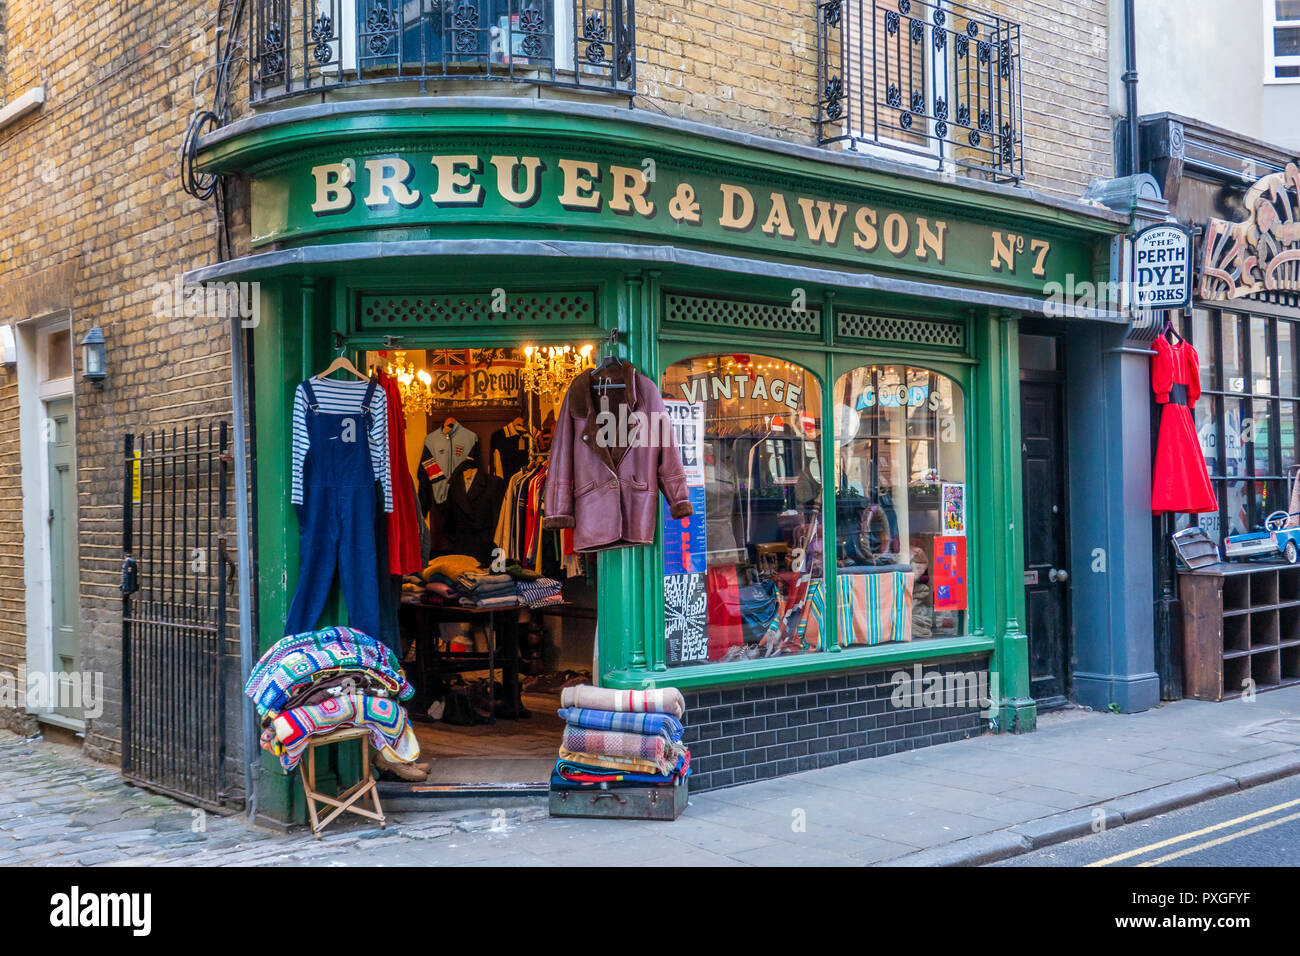 Trendy Vintage Clothes Shop, Margate Old Town, Margate, Thanet, Kent, England Stockfoto